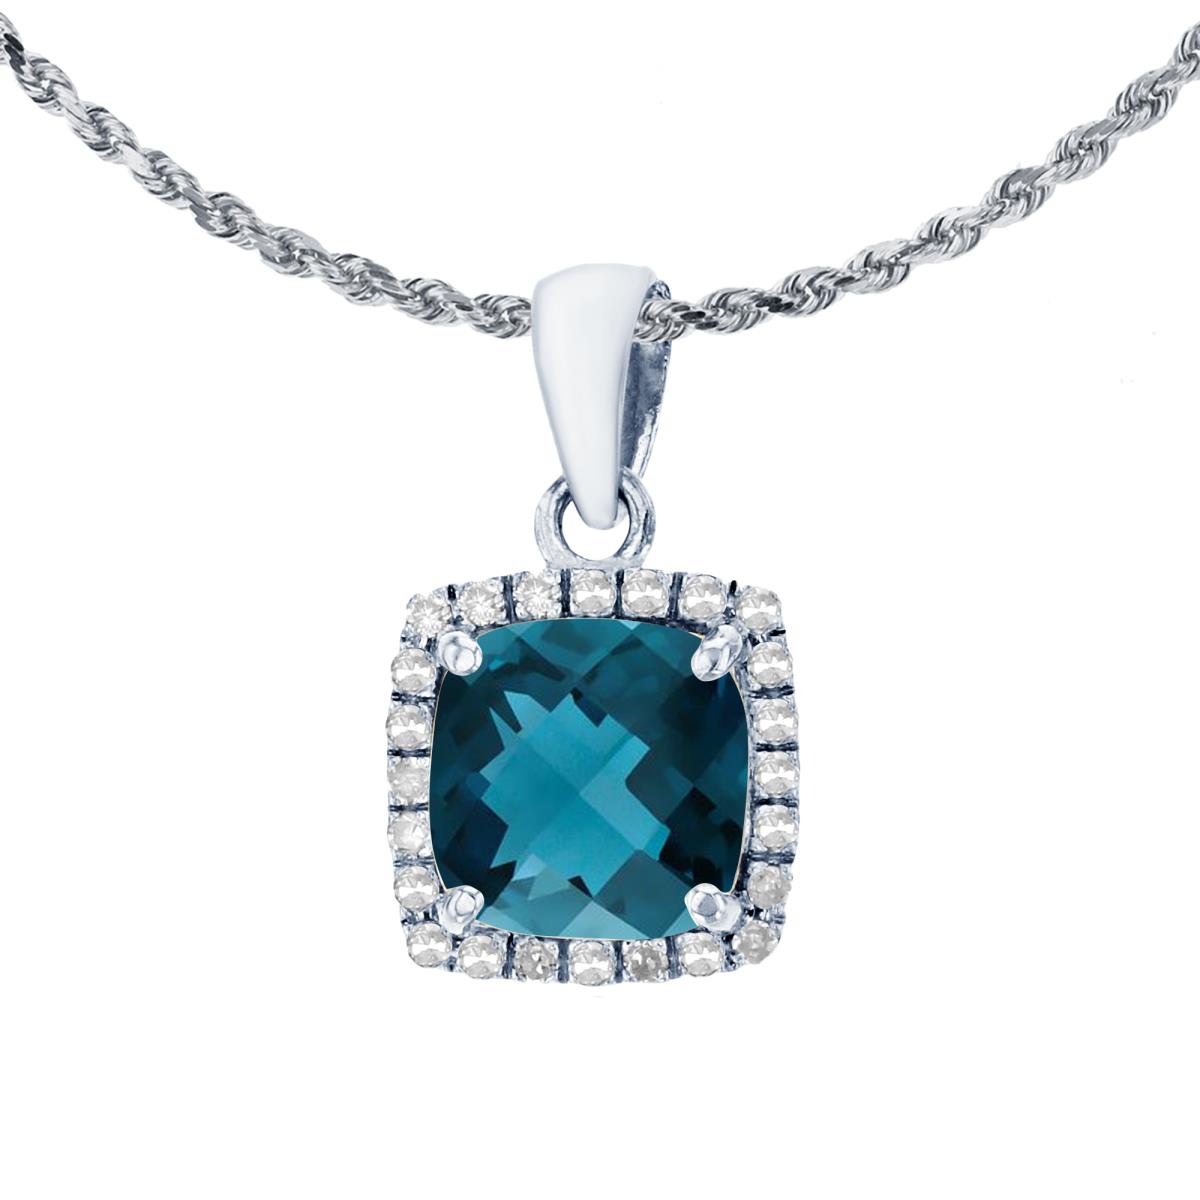 10K White Gold 7mm Cushion London Blue Topaz & 0.12 CTTW Diamond Halo 18" Rope Chain Necklace